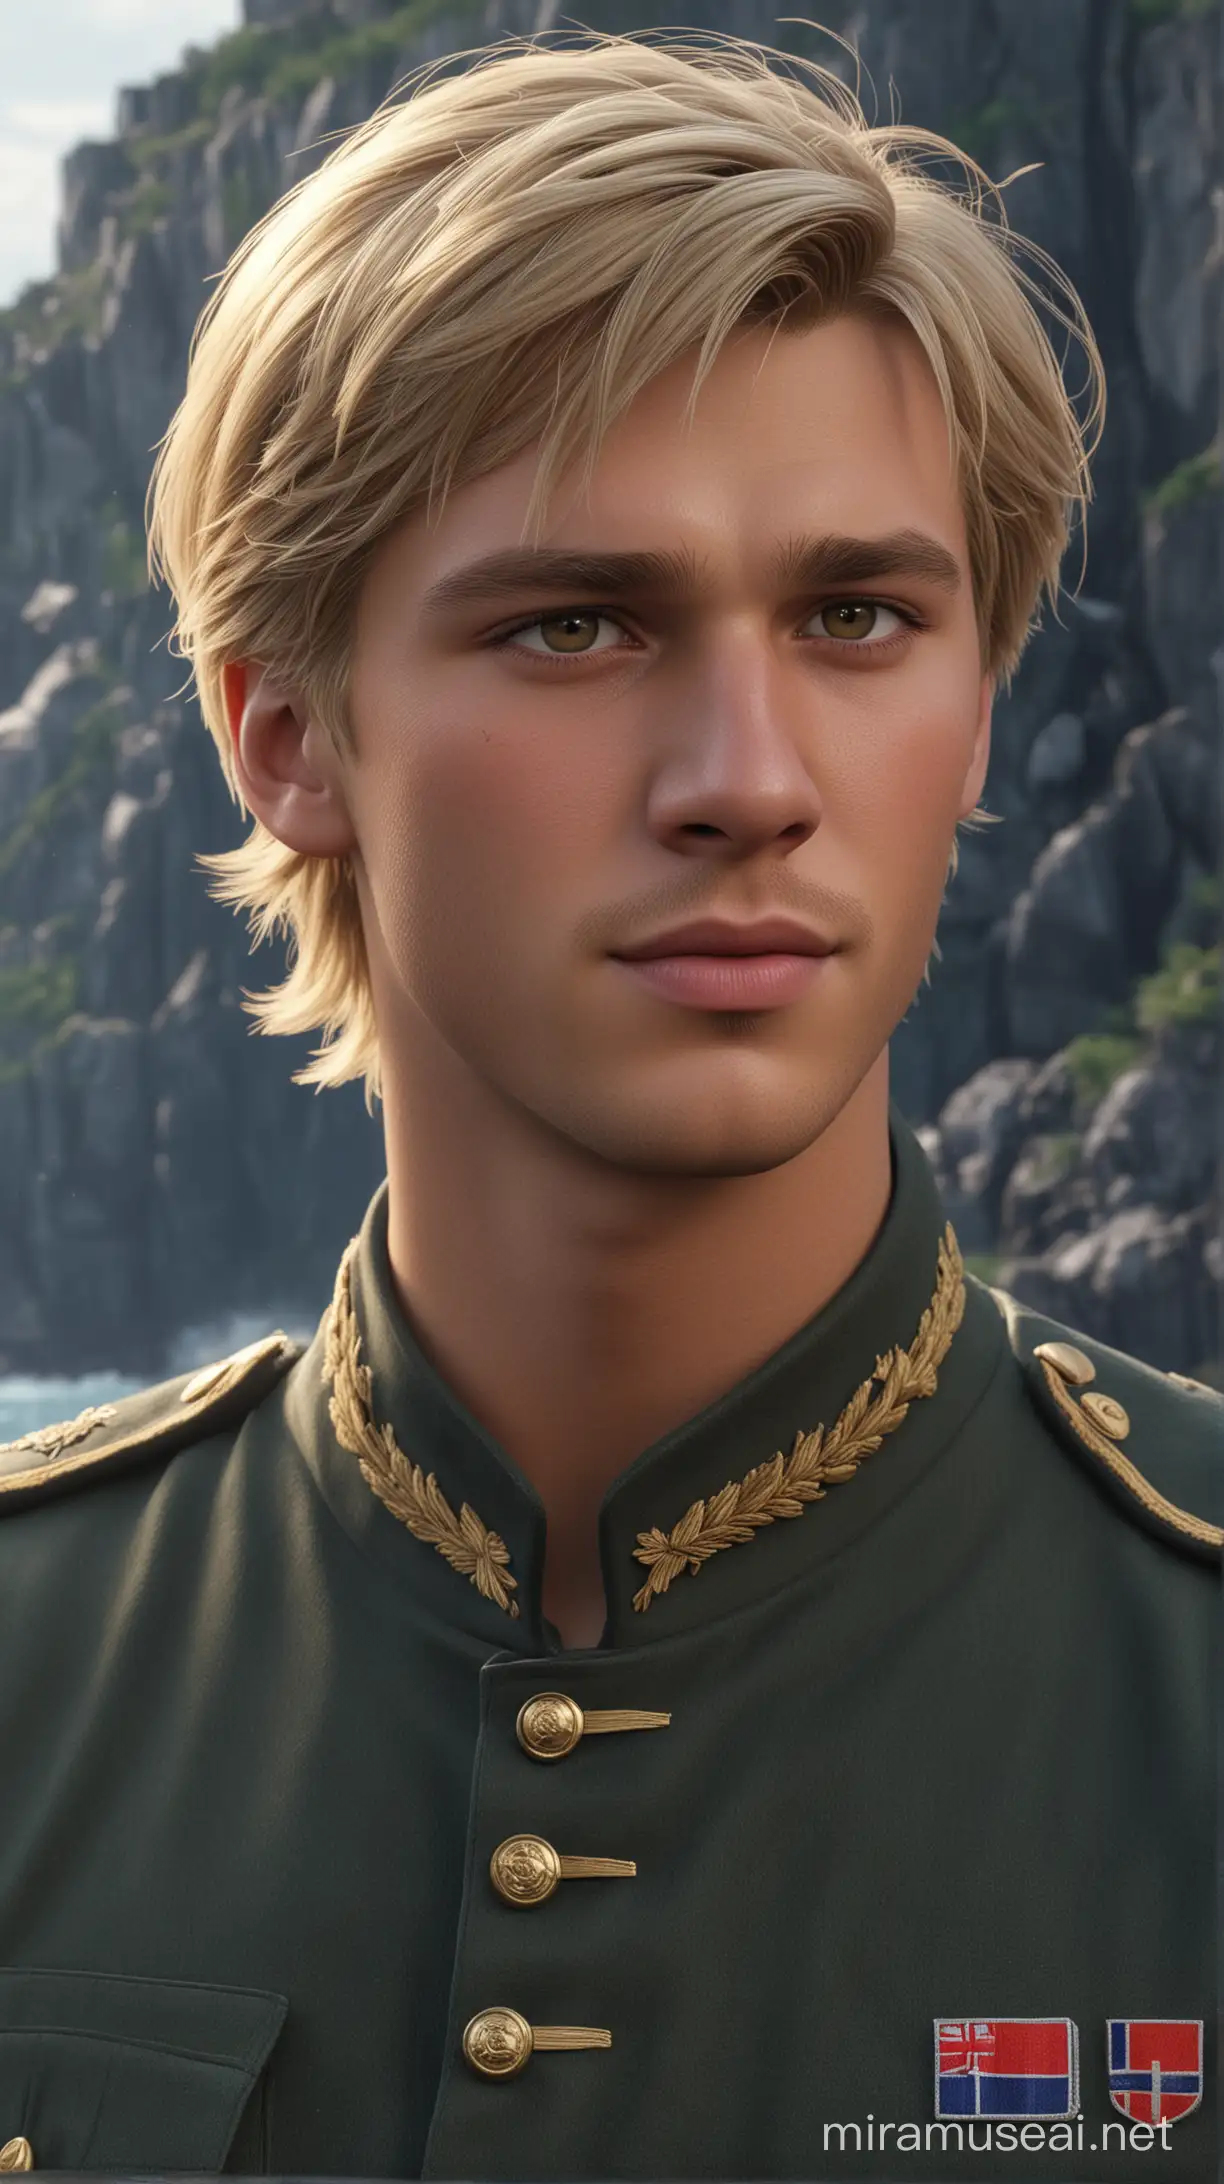 Norwegian Military Prince Kristoff in Natural Background